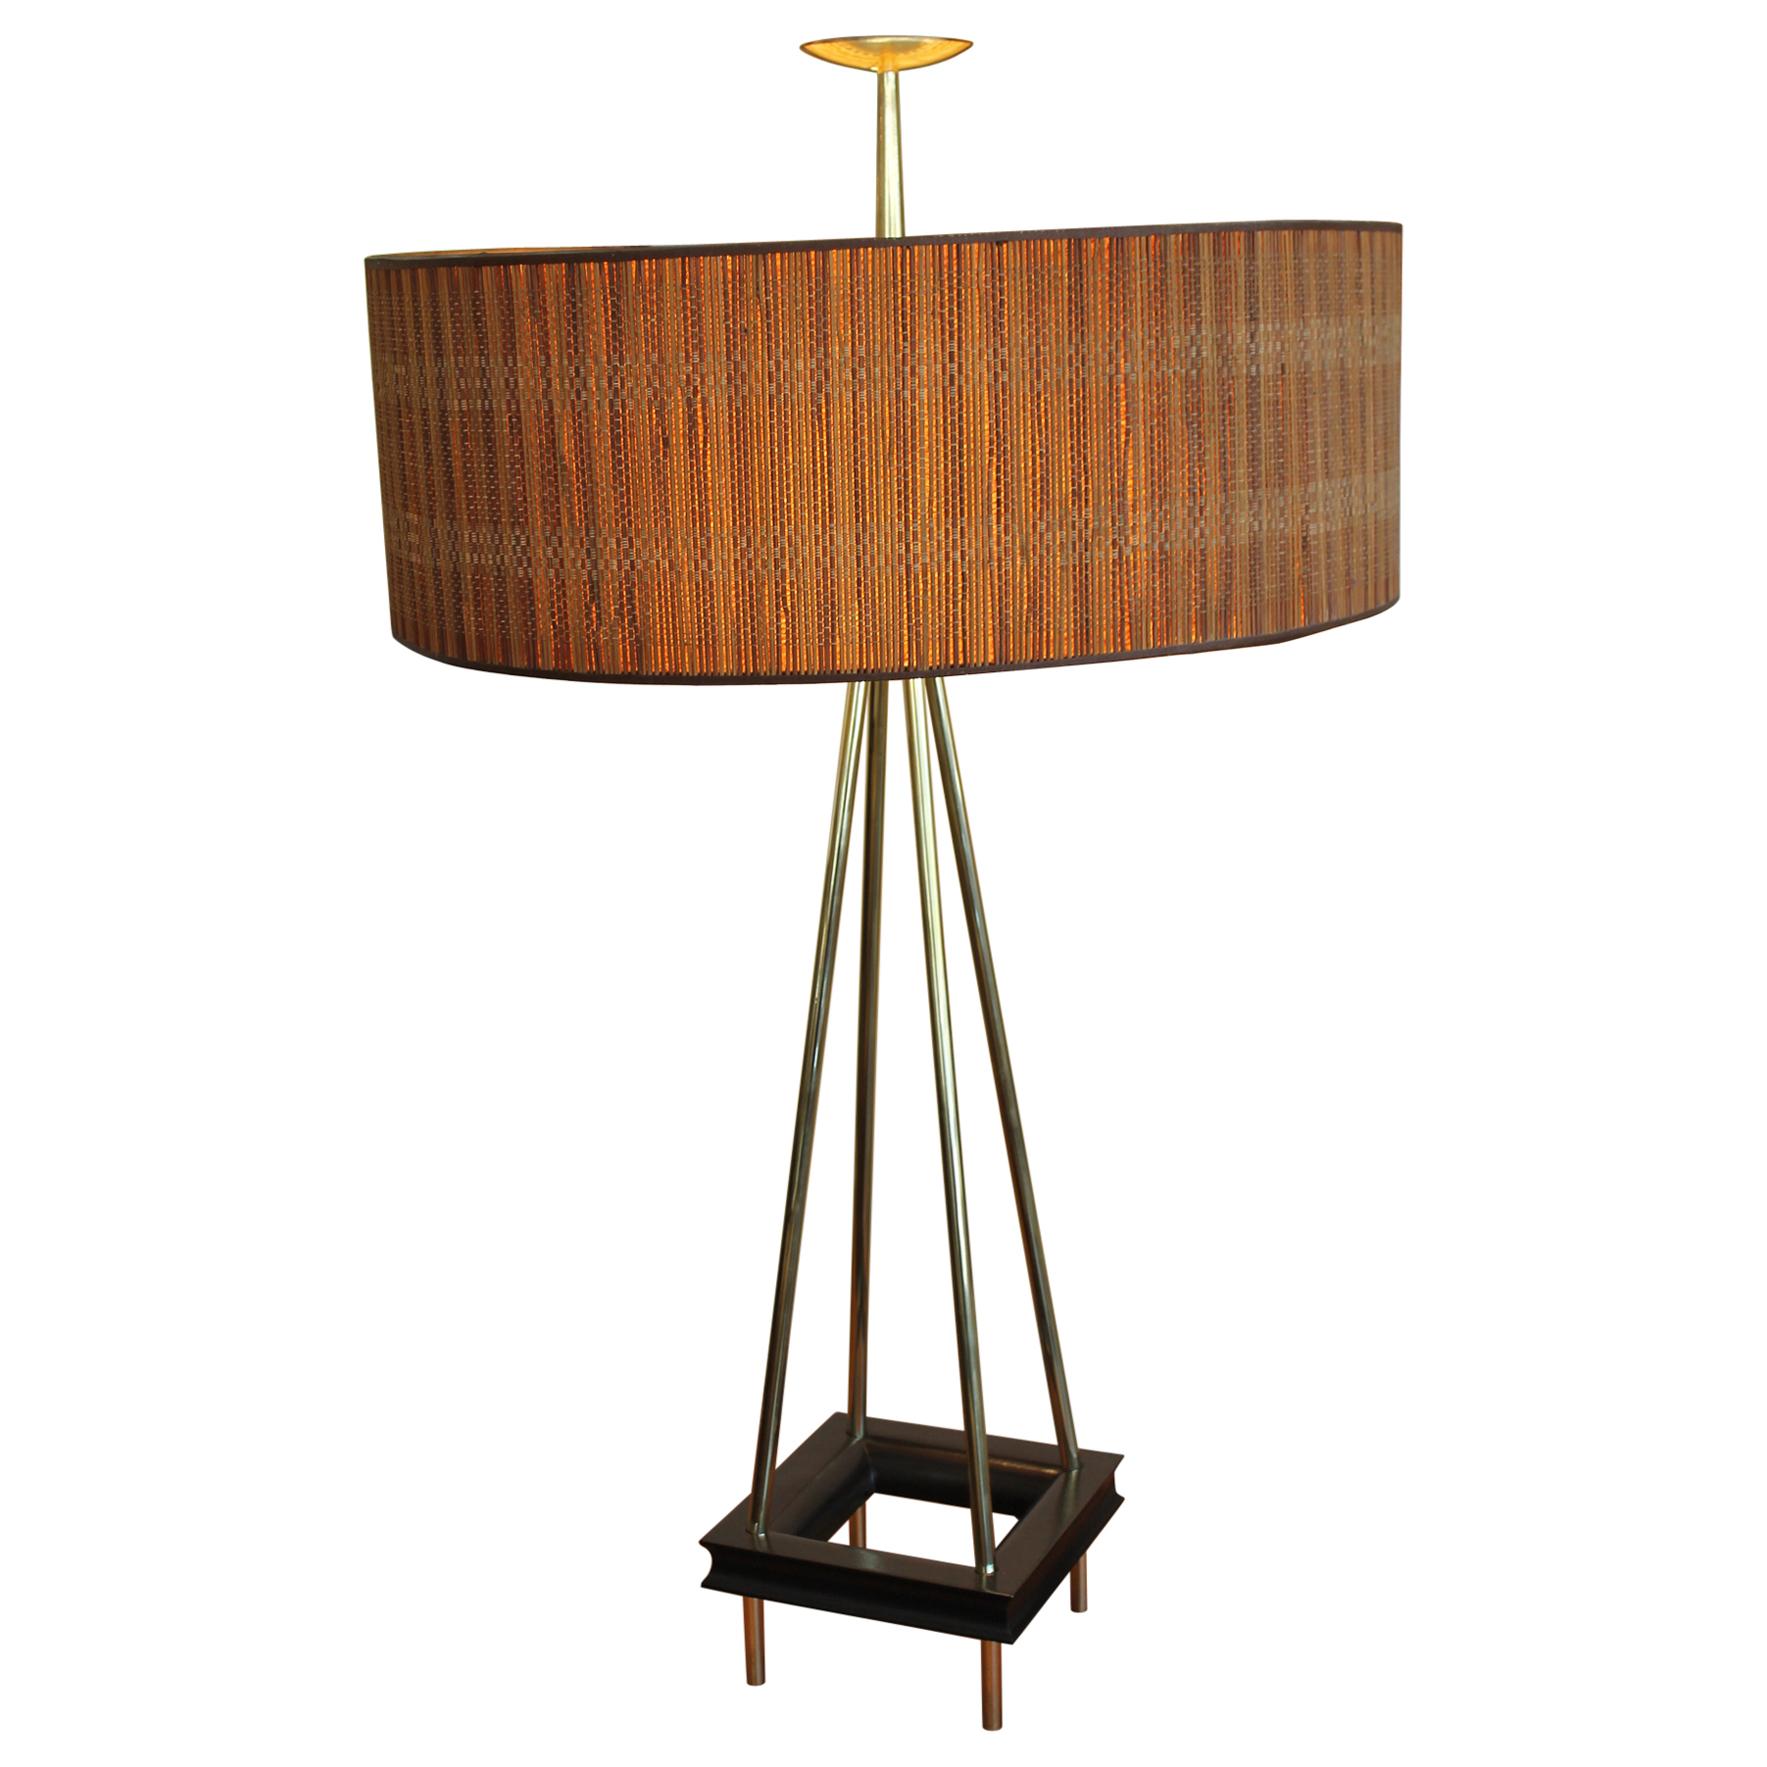 Stiffel Lamp with Original Shade, Diffusers and Finial